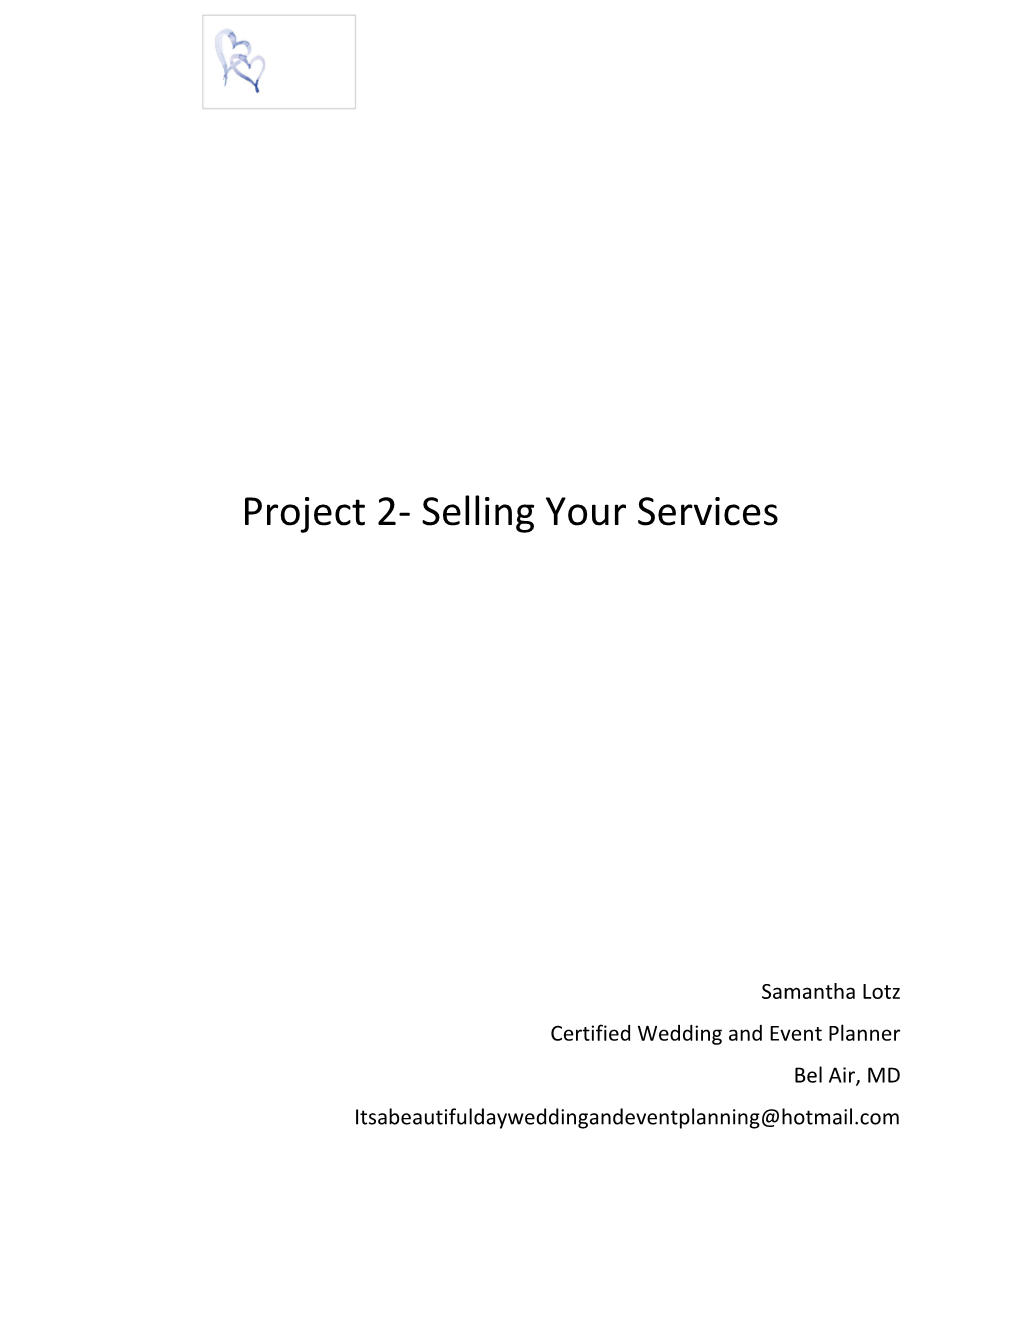 Project 2- Selling Your Services s1